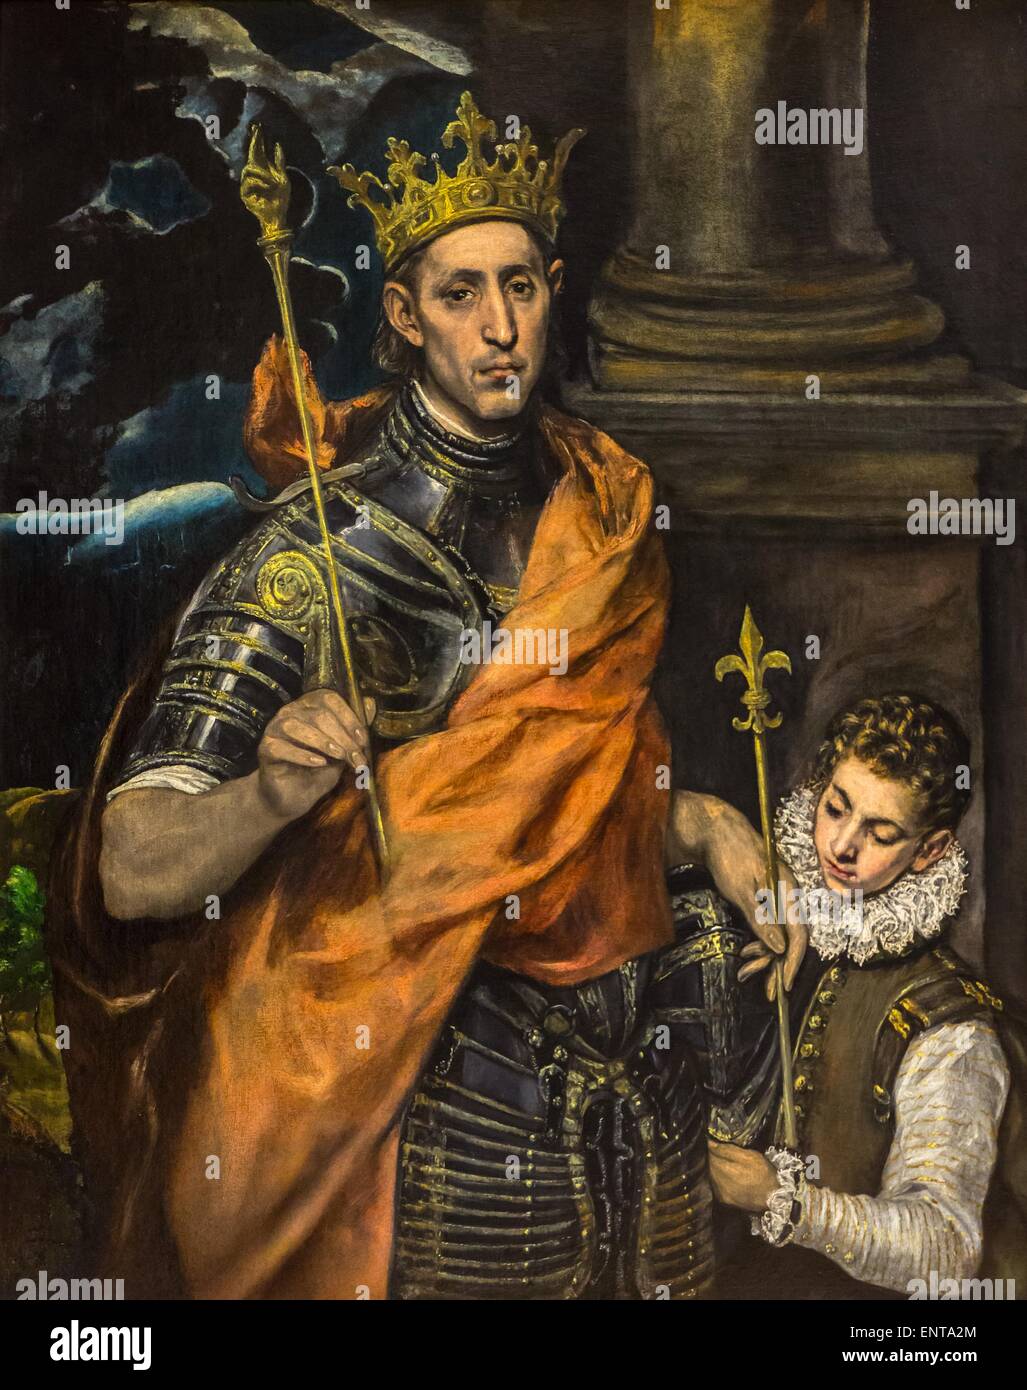 Saint Louis (Louis IX of France), King of France and a page 02/10/2013 - 16th century Collection Stock Photo